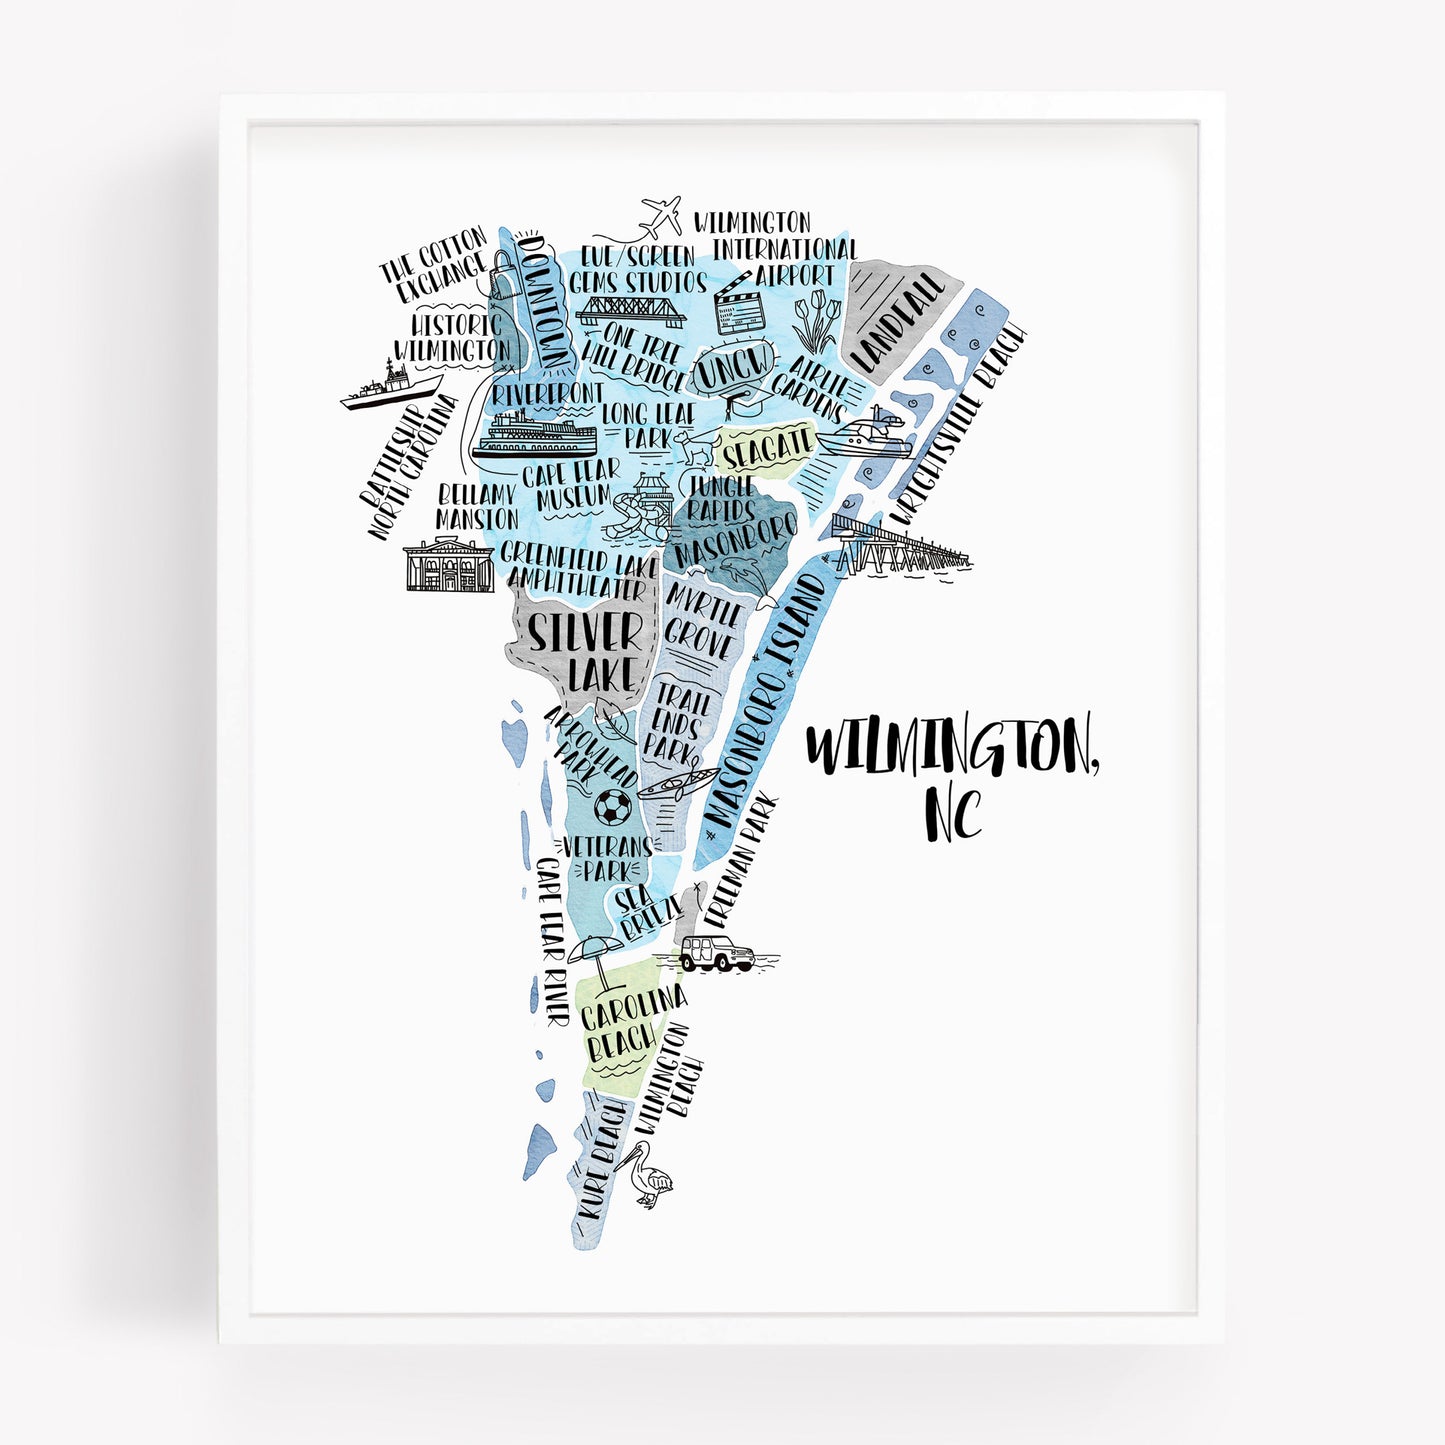 An illustrated map of Wilmington North Carolina, as a print, in the color blue